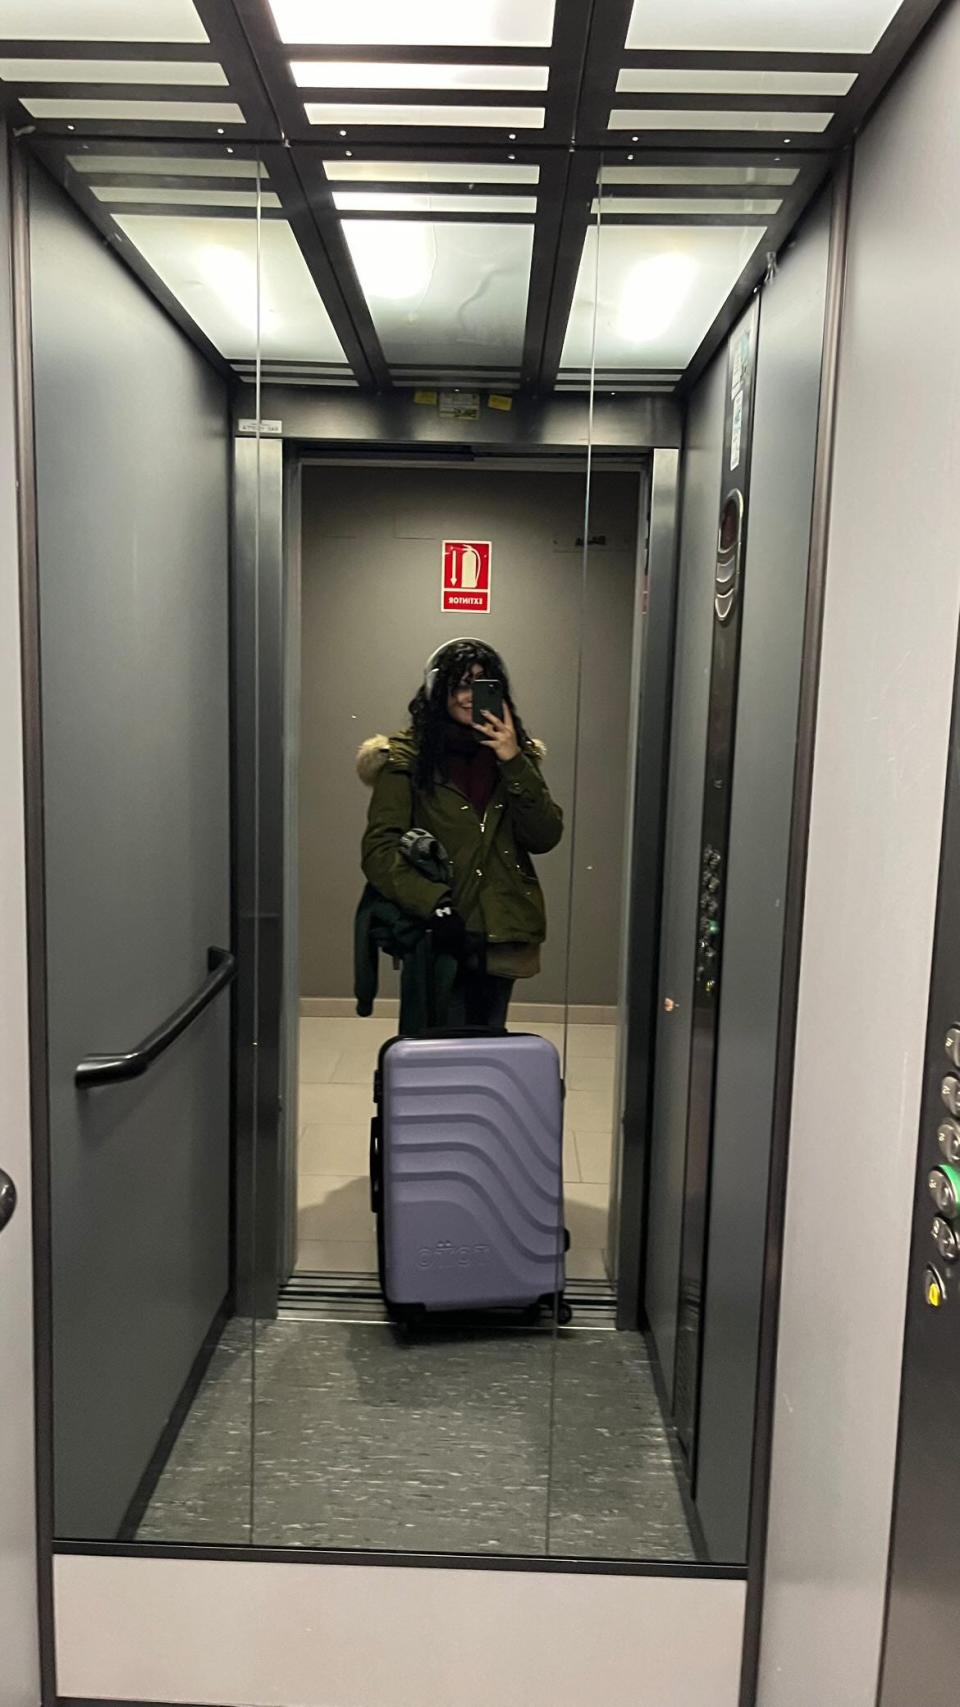 Girl in an elevator standing with purple suitcase